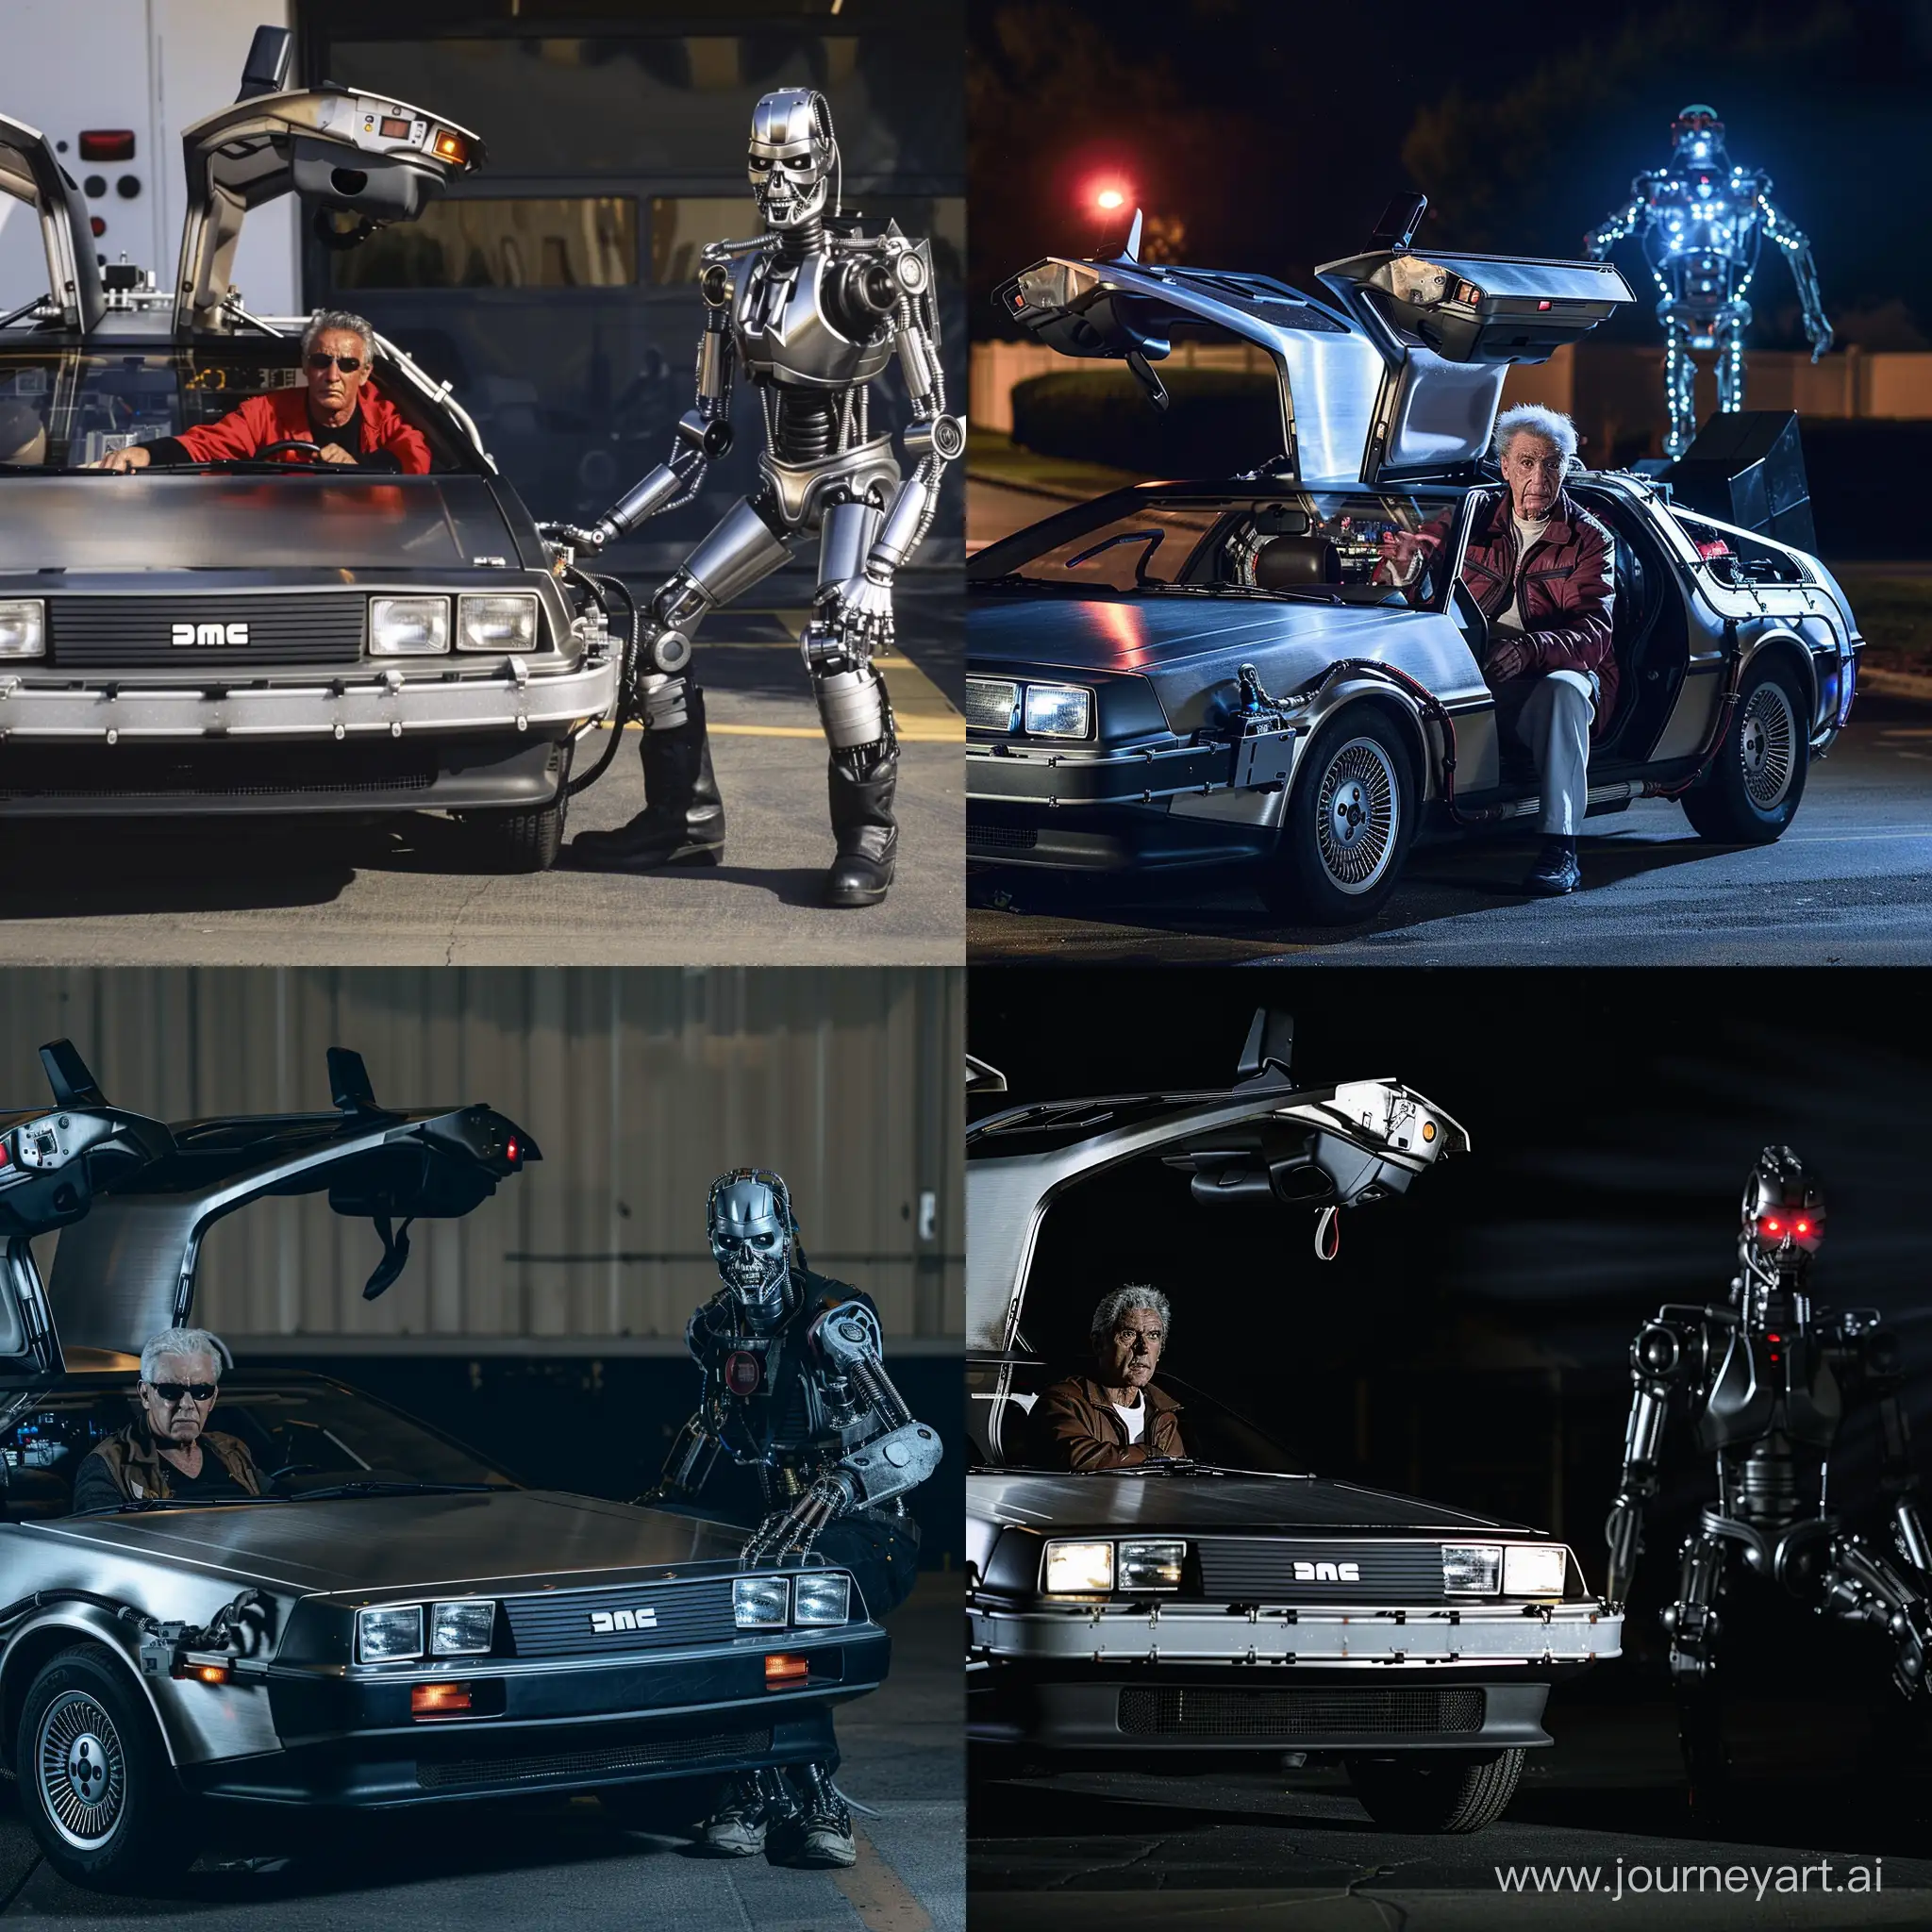 Doc brown sitting in the DeLorean time machine Infront of the t-800, scary, movie scene